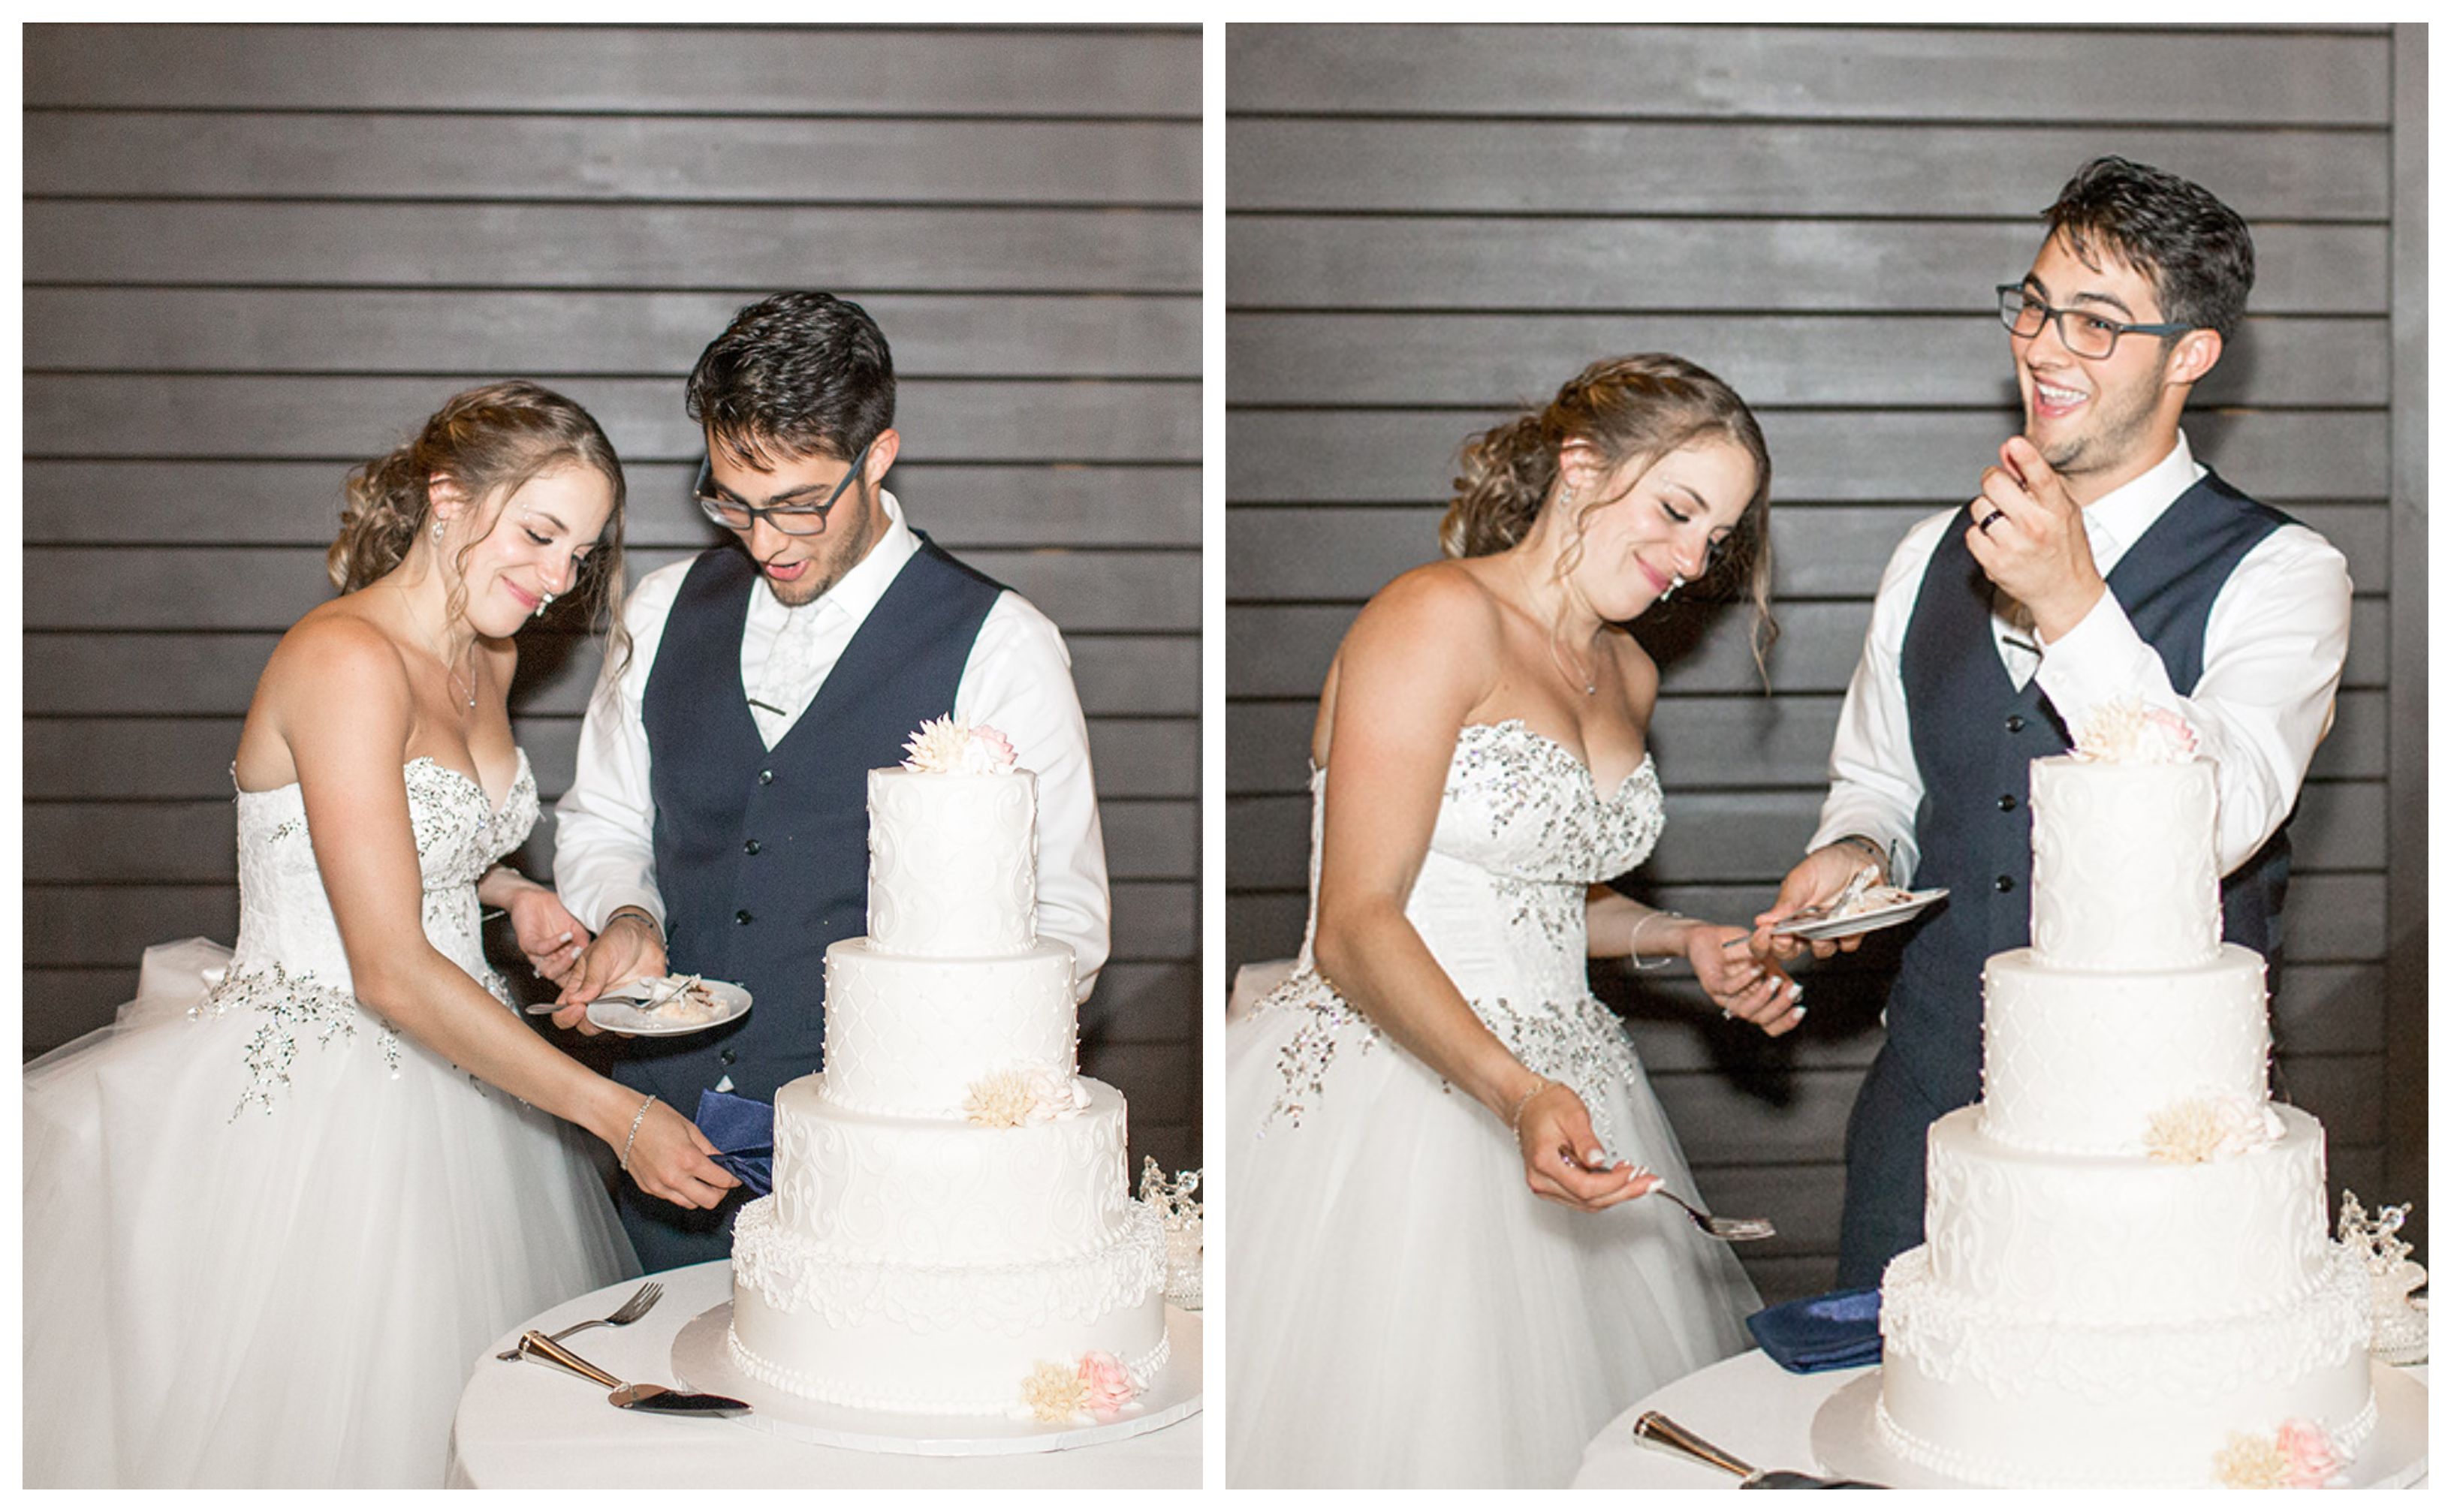 wedding cake cutting at chubb hotel and conference center